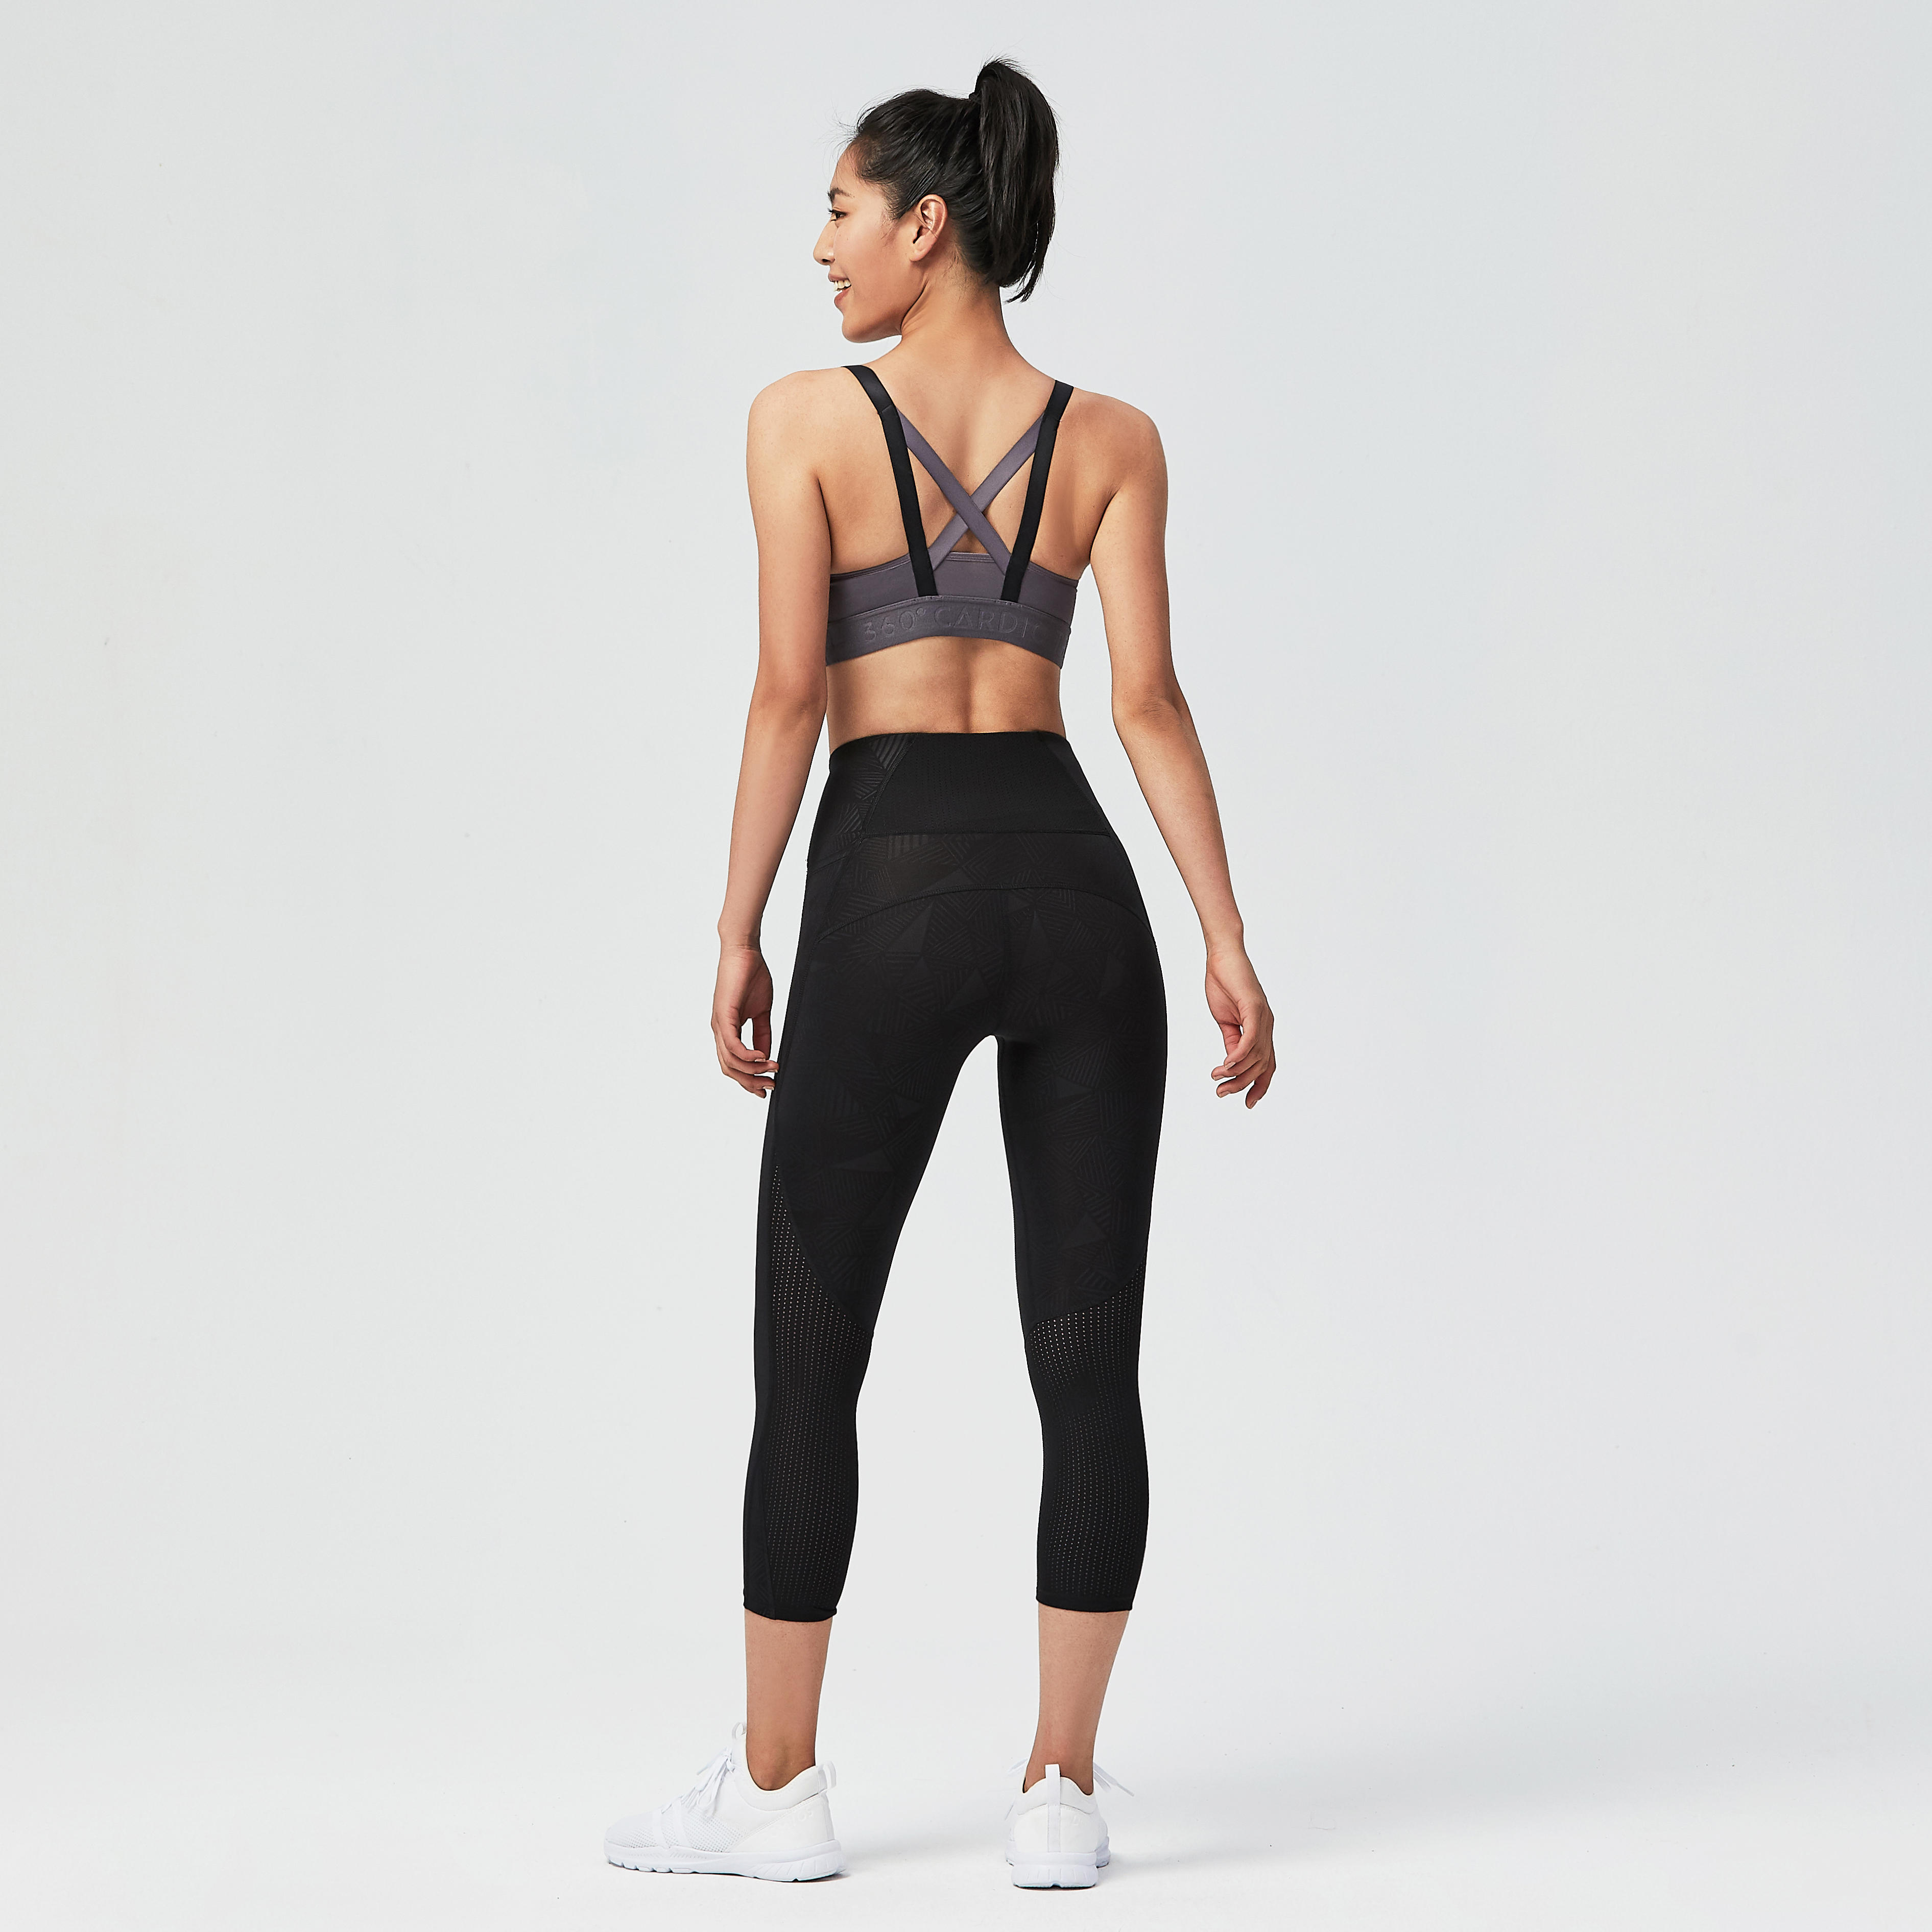 Full-length Side Portrait of the Young Athletic Woman in Black Short Top  and Gray Leggings Posing at White Background. Stock Photo - Image of  figure, leggings: 113618728